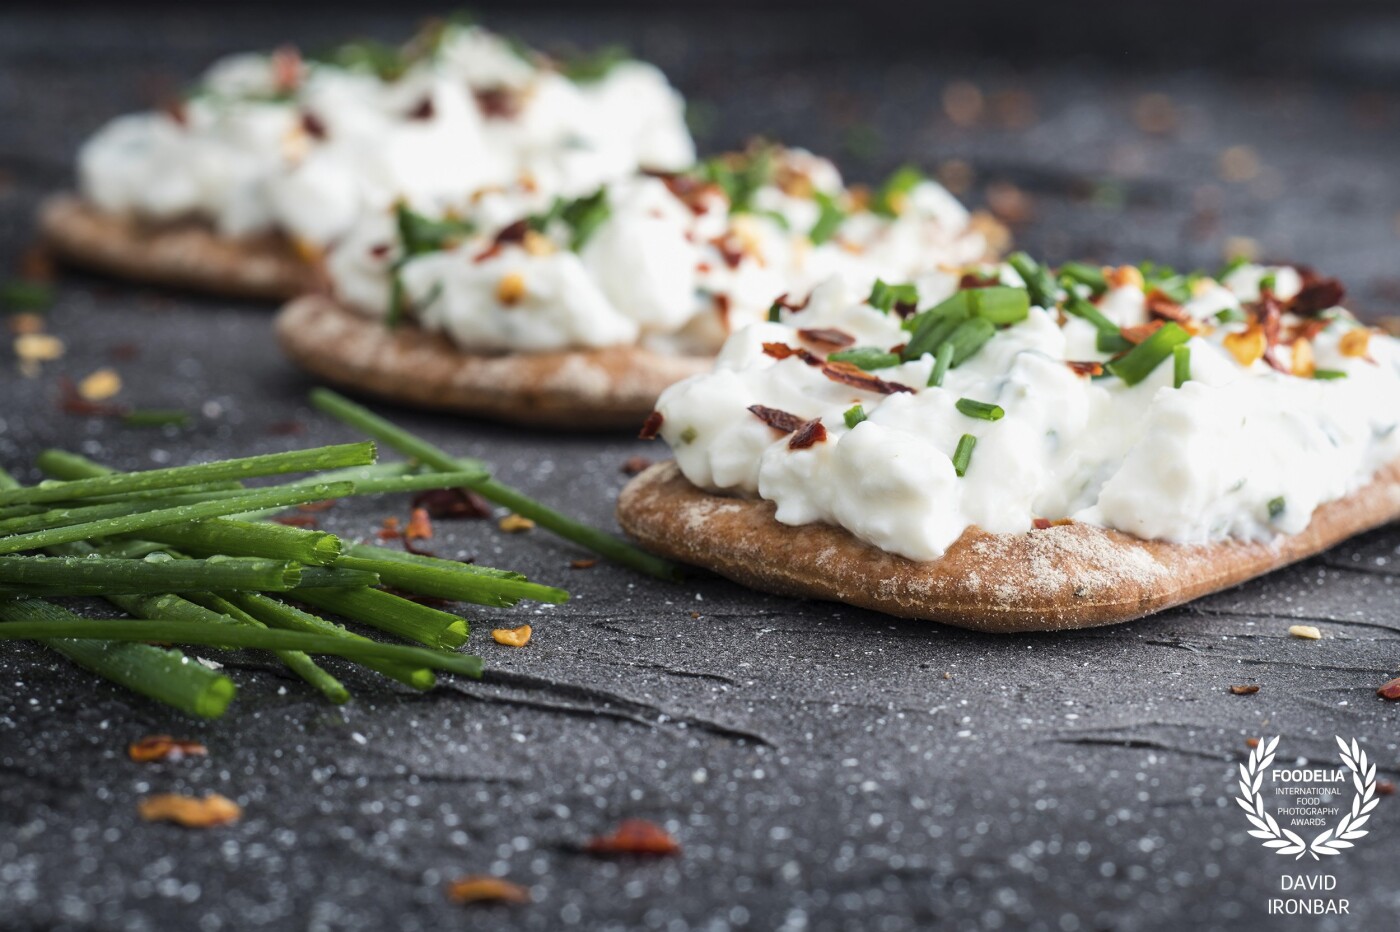 Cottage Cheese with a sprinkle of Chilli flakes & Chives on rustic biscuits, taken in natural light.                                <br />
